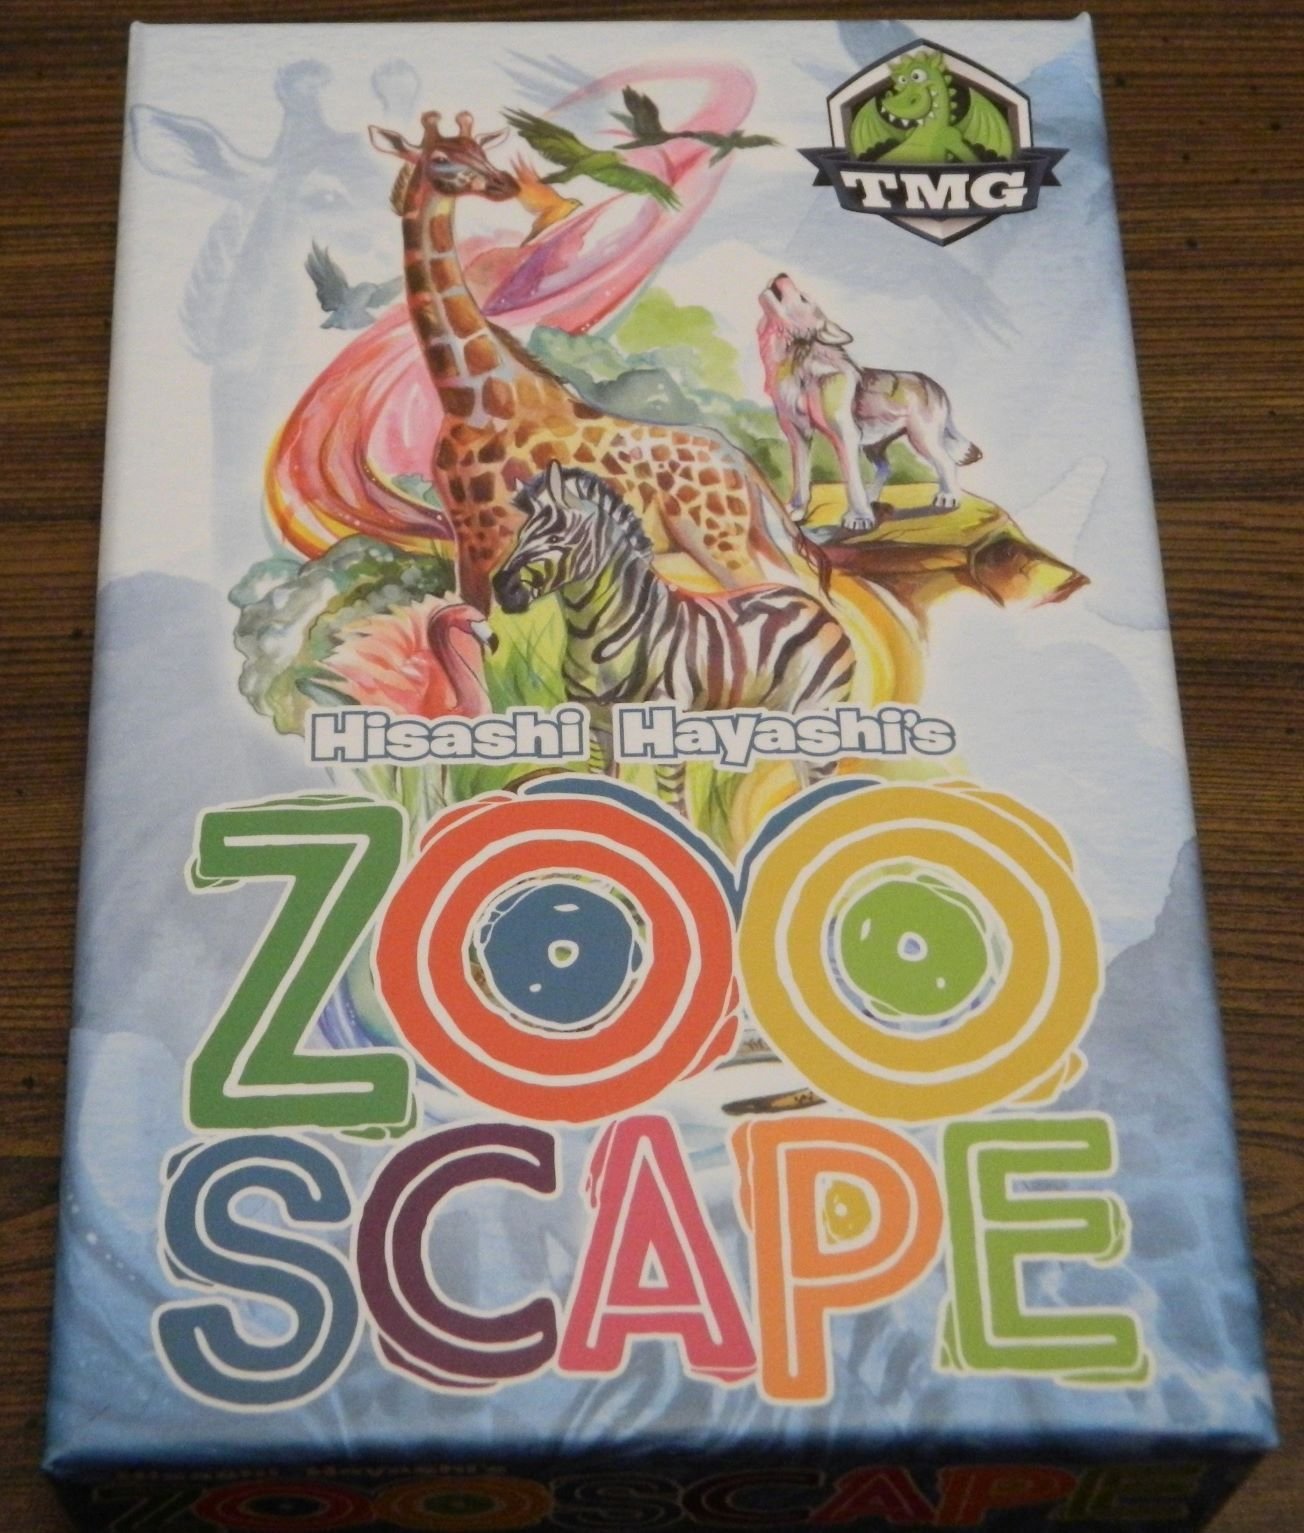 Zooscape Card Game Review and Rules - Geeky Hobbies